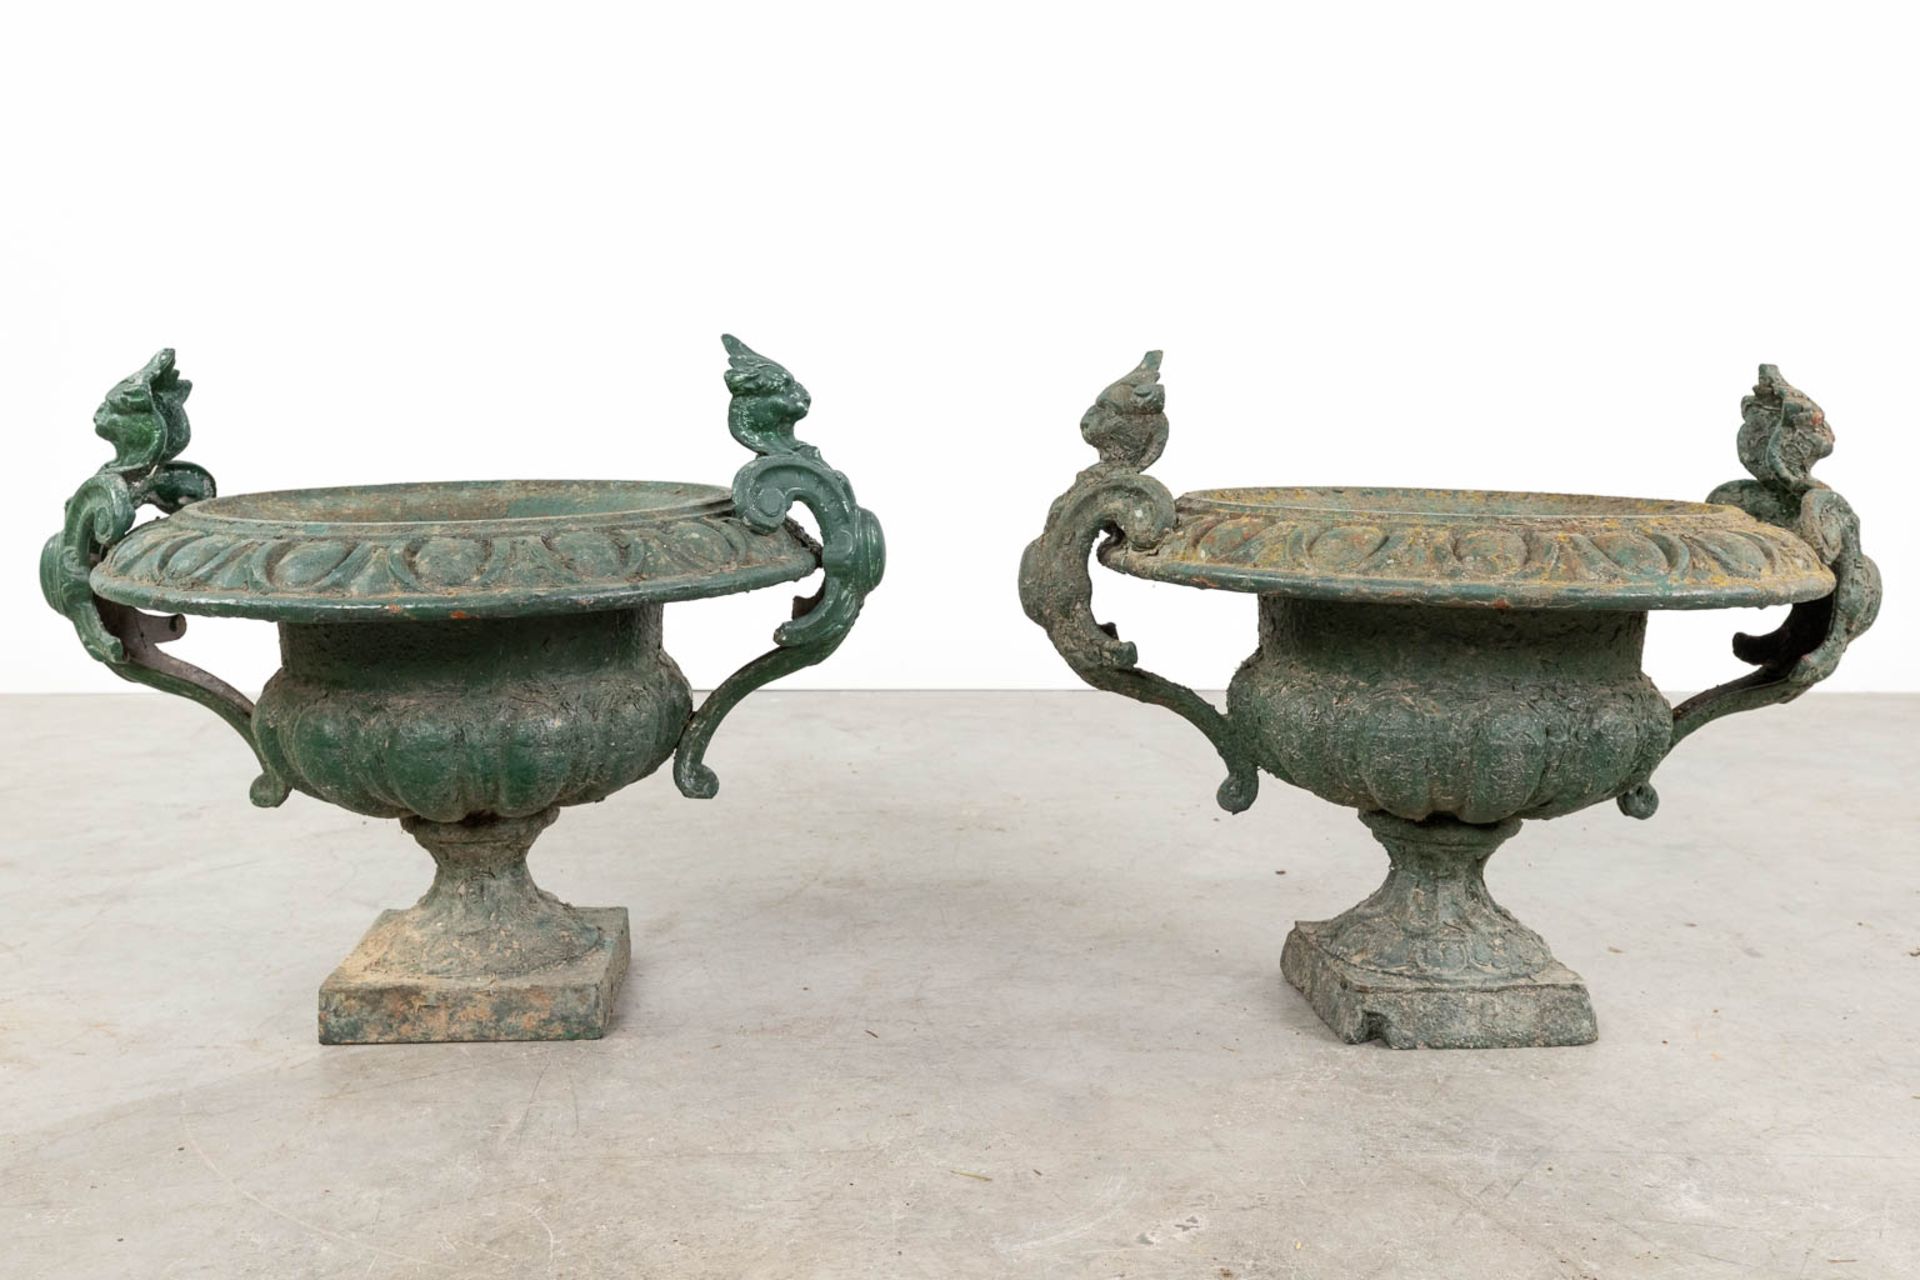 A collection of 3 garden vases, made of cast iron. (L:33 x W:68 x H:34 cm) - Image 3 of 15